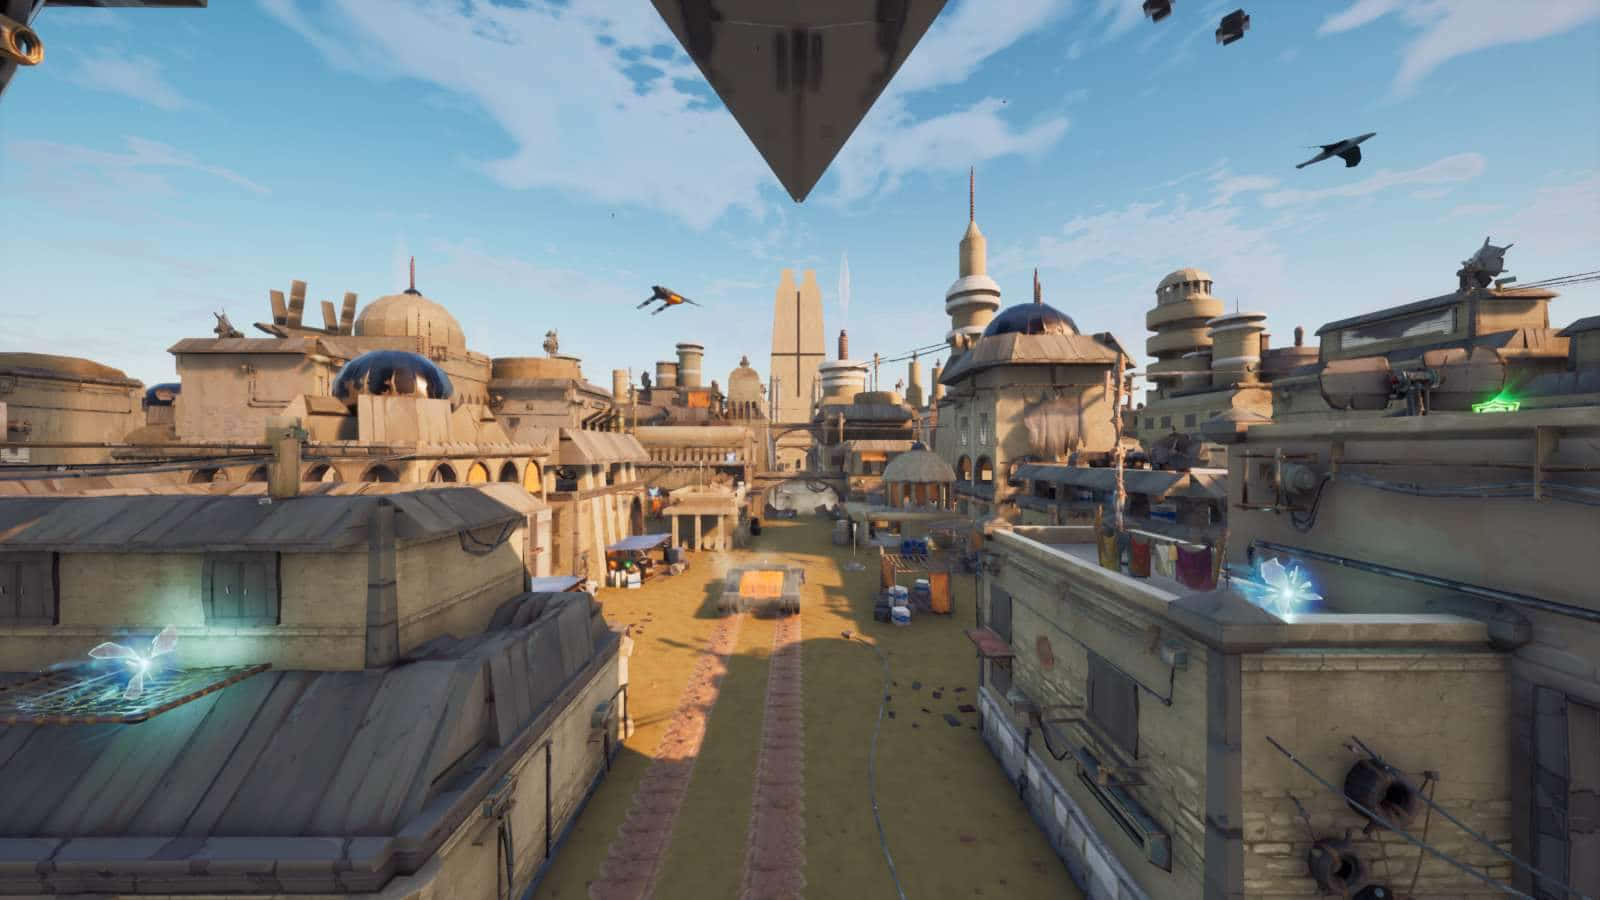 The Majestic City of Jedha under a captivating blue sky Wallpaper